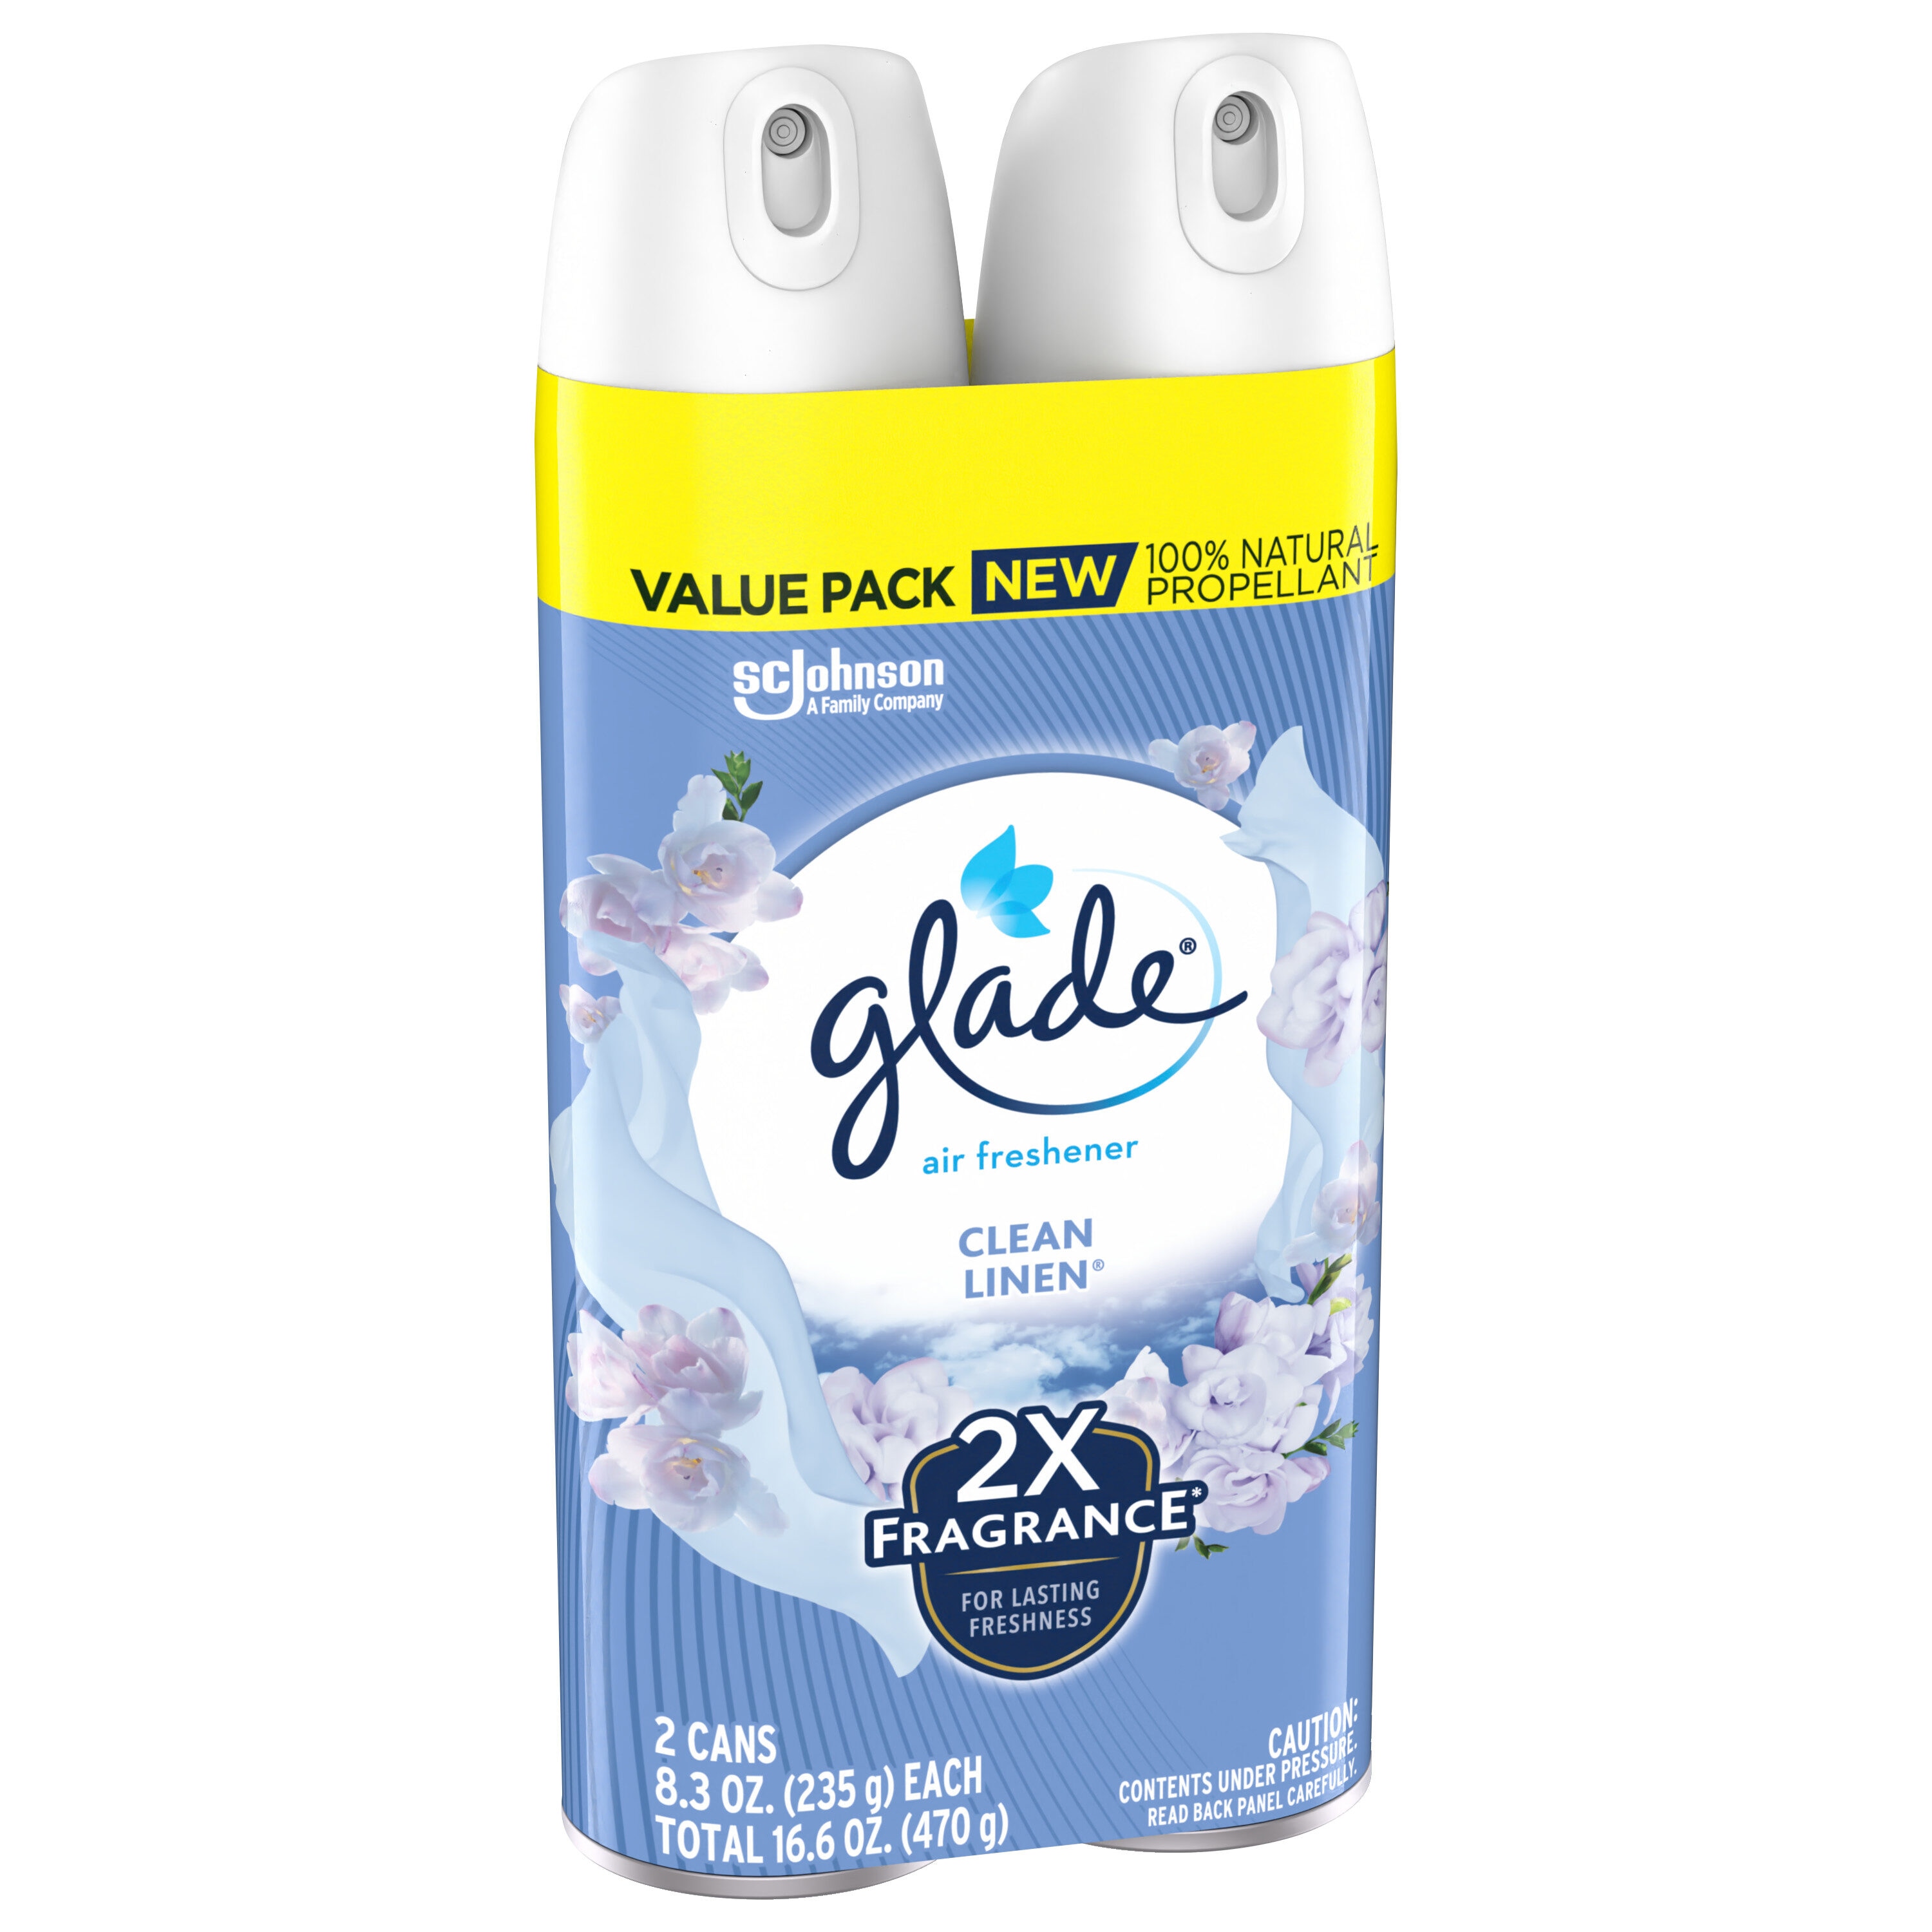 Buy Glade Solid Air Freshener Clean Linen online at